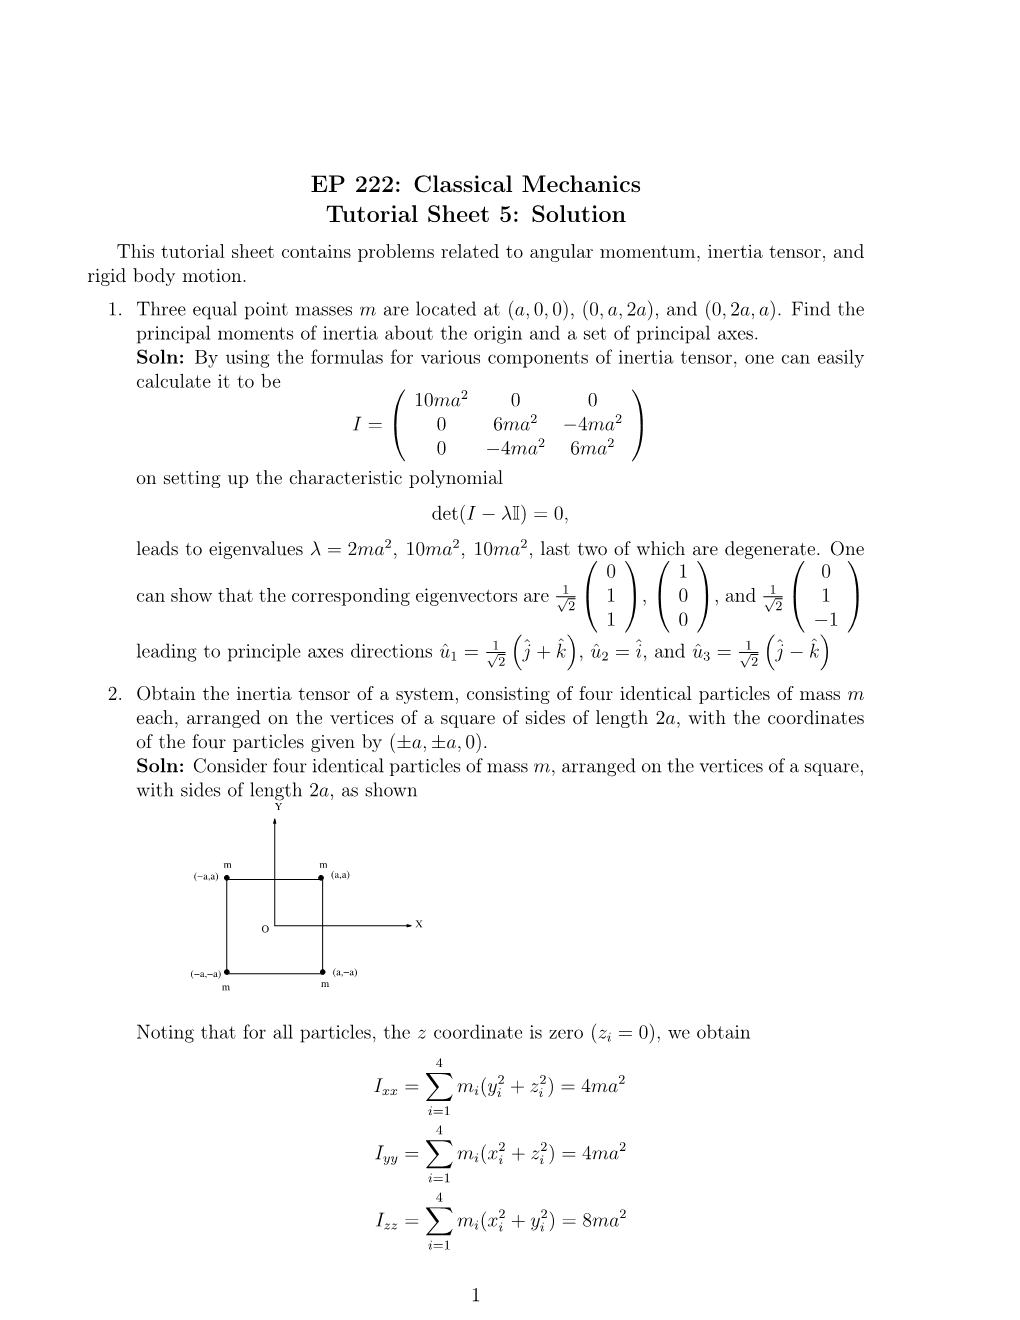 EP 222: Classical Mechanics Tutorial Sheet 5: Solution This Tutorial Sheet Contains Problems Related to Angular Momentum, Inertia Tensor, and Rigid Body Motion